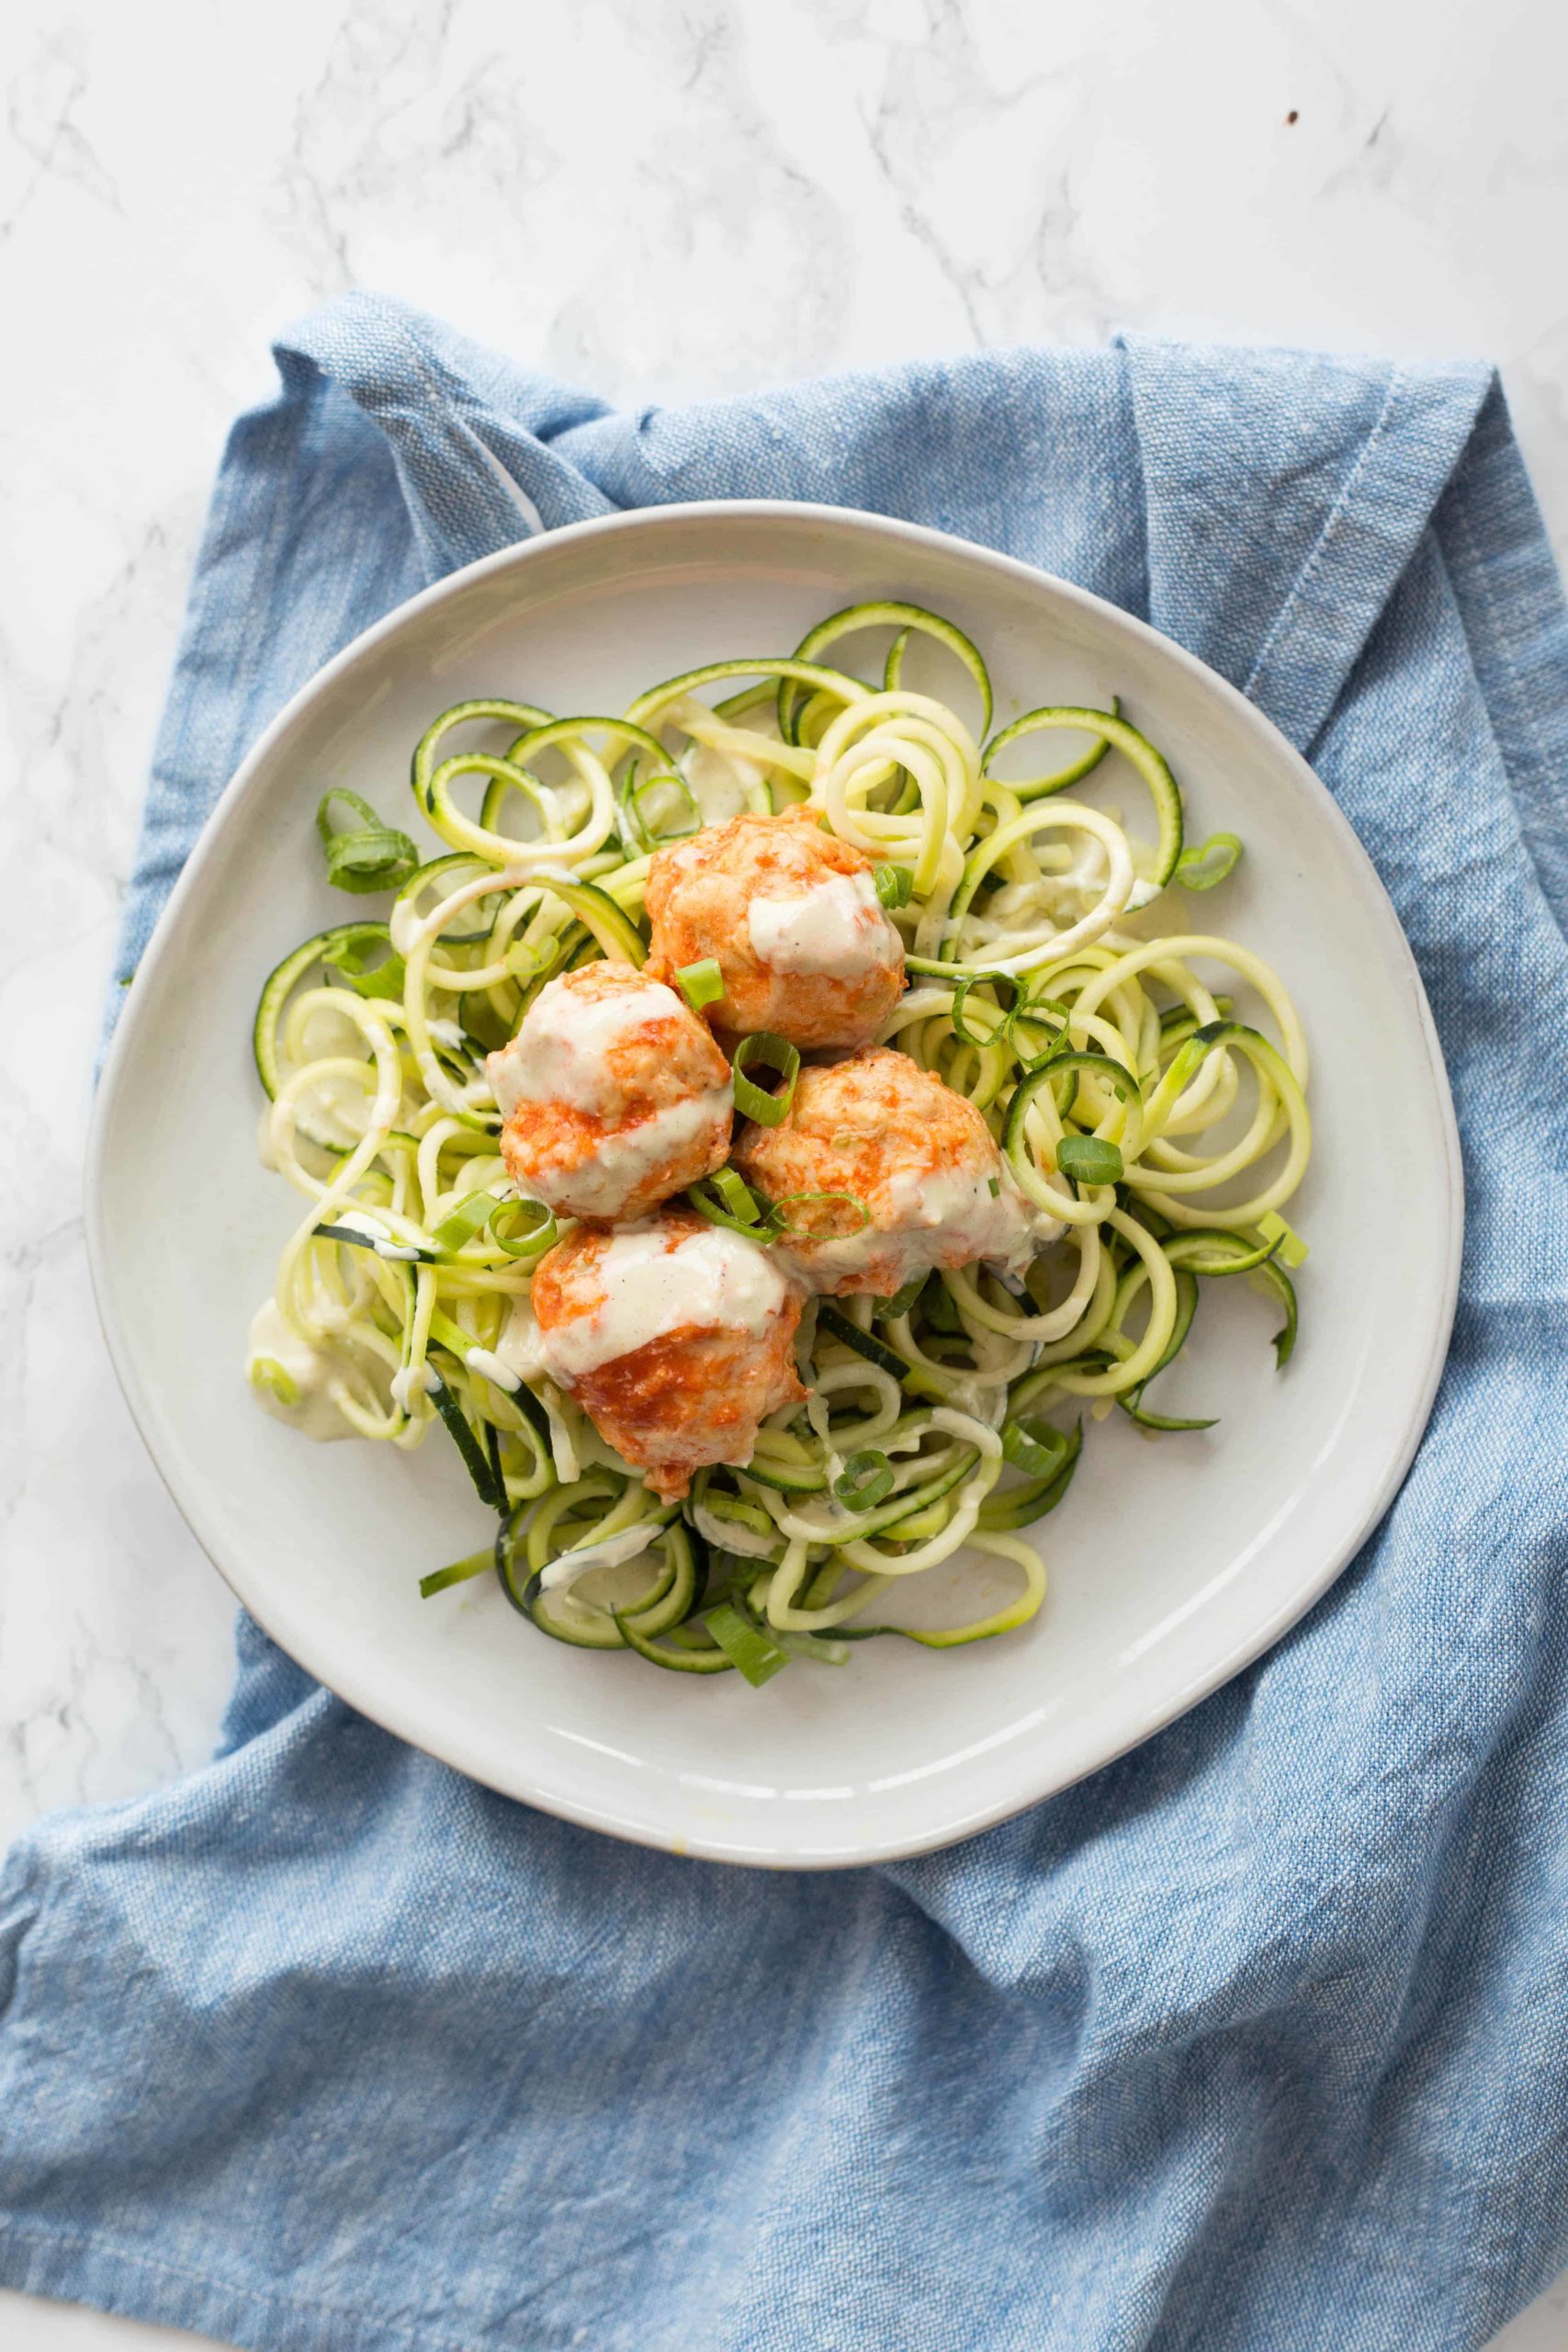 Buffalo Chicken Meatballs with Zucchini Noodles and Avocado Ranch Dressing